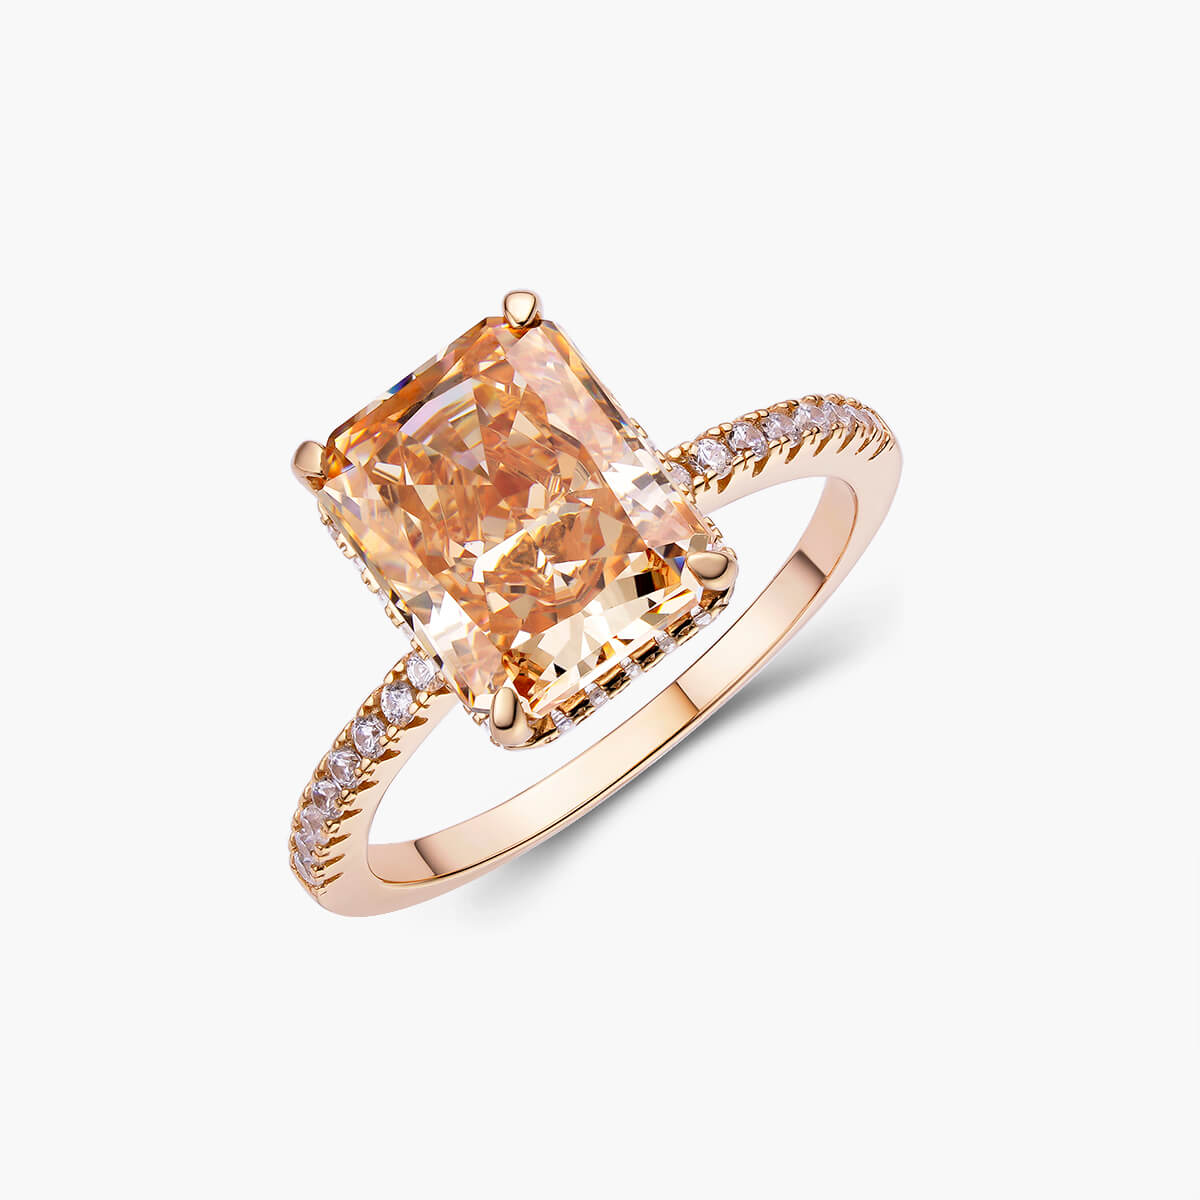 Glow Ring in champagne color.